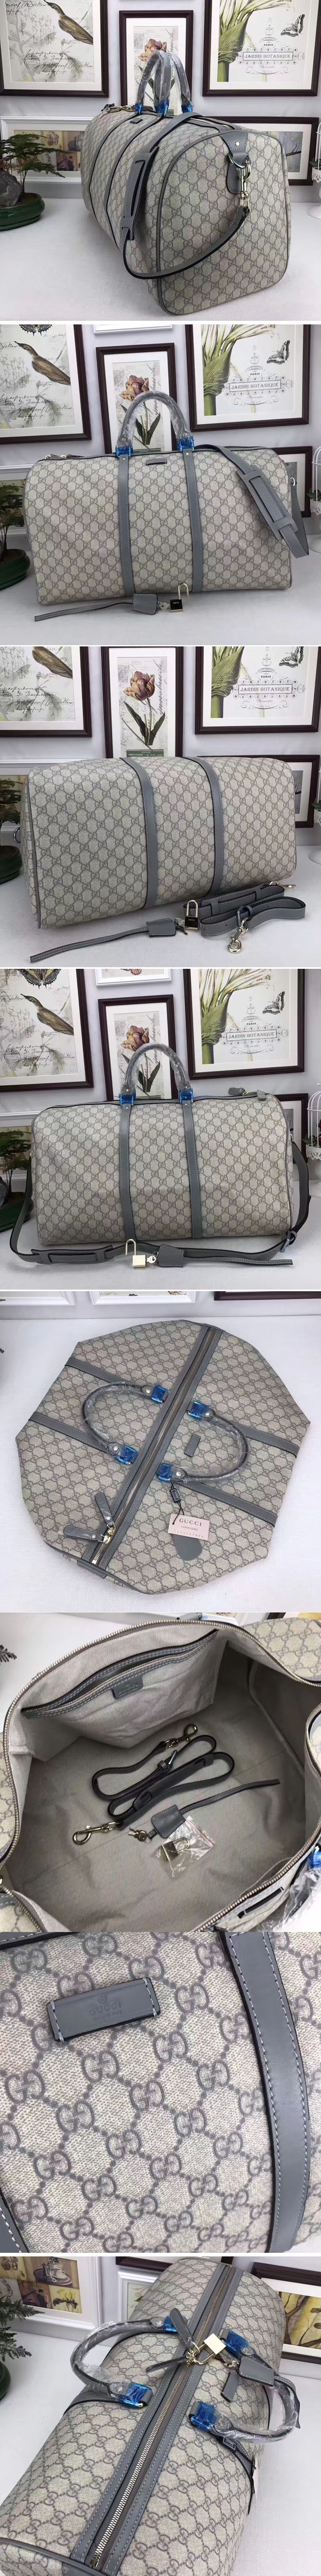 Replica Gucci 206500 GG Fabric Large Carry On Duffel Bags Grey